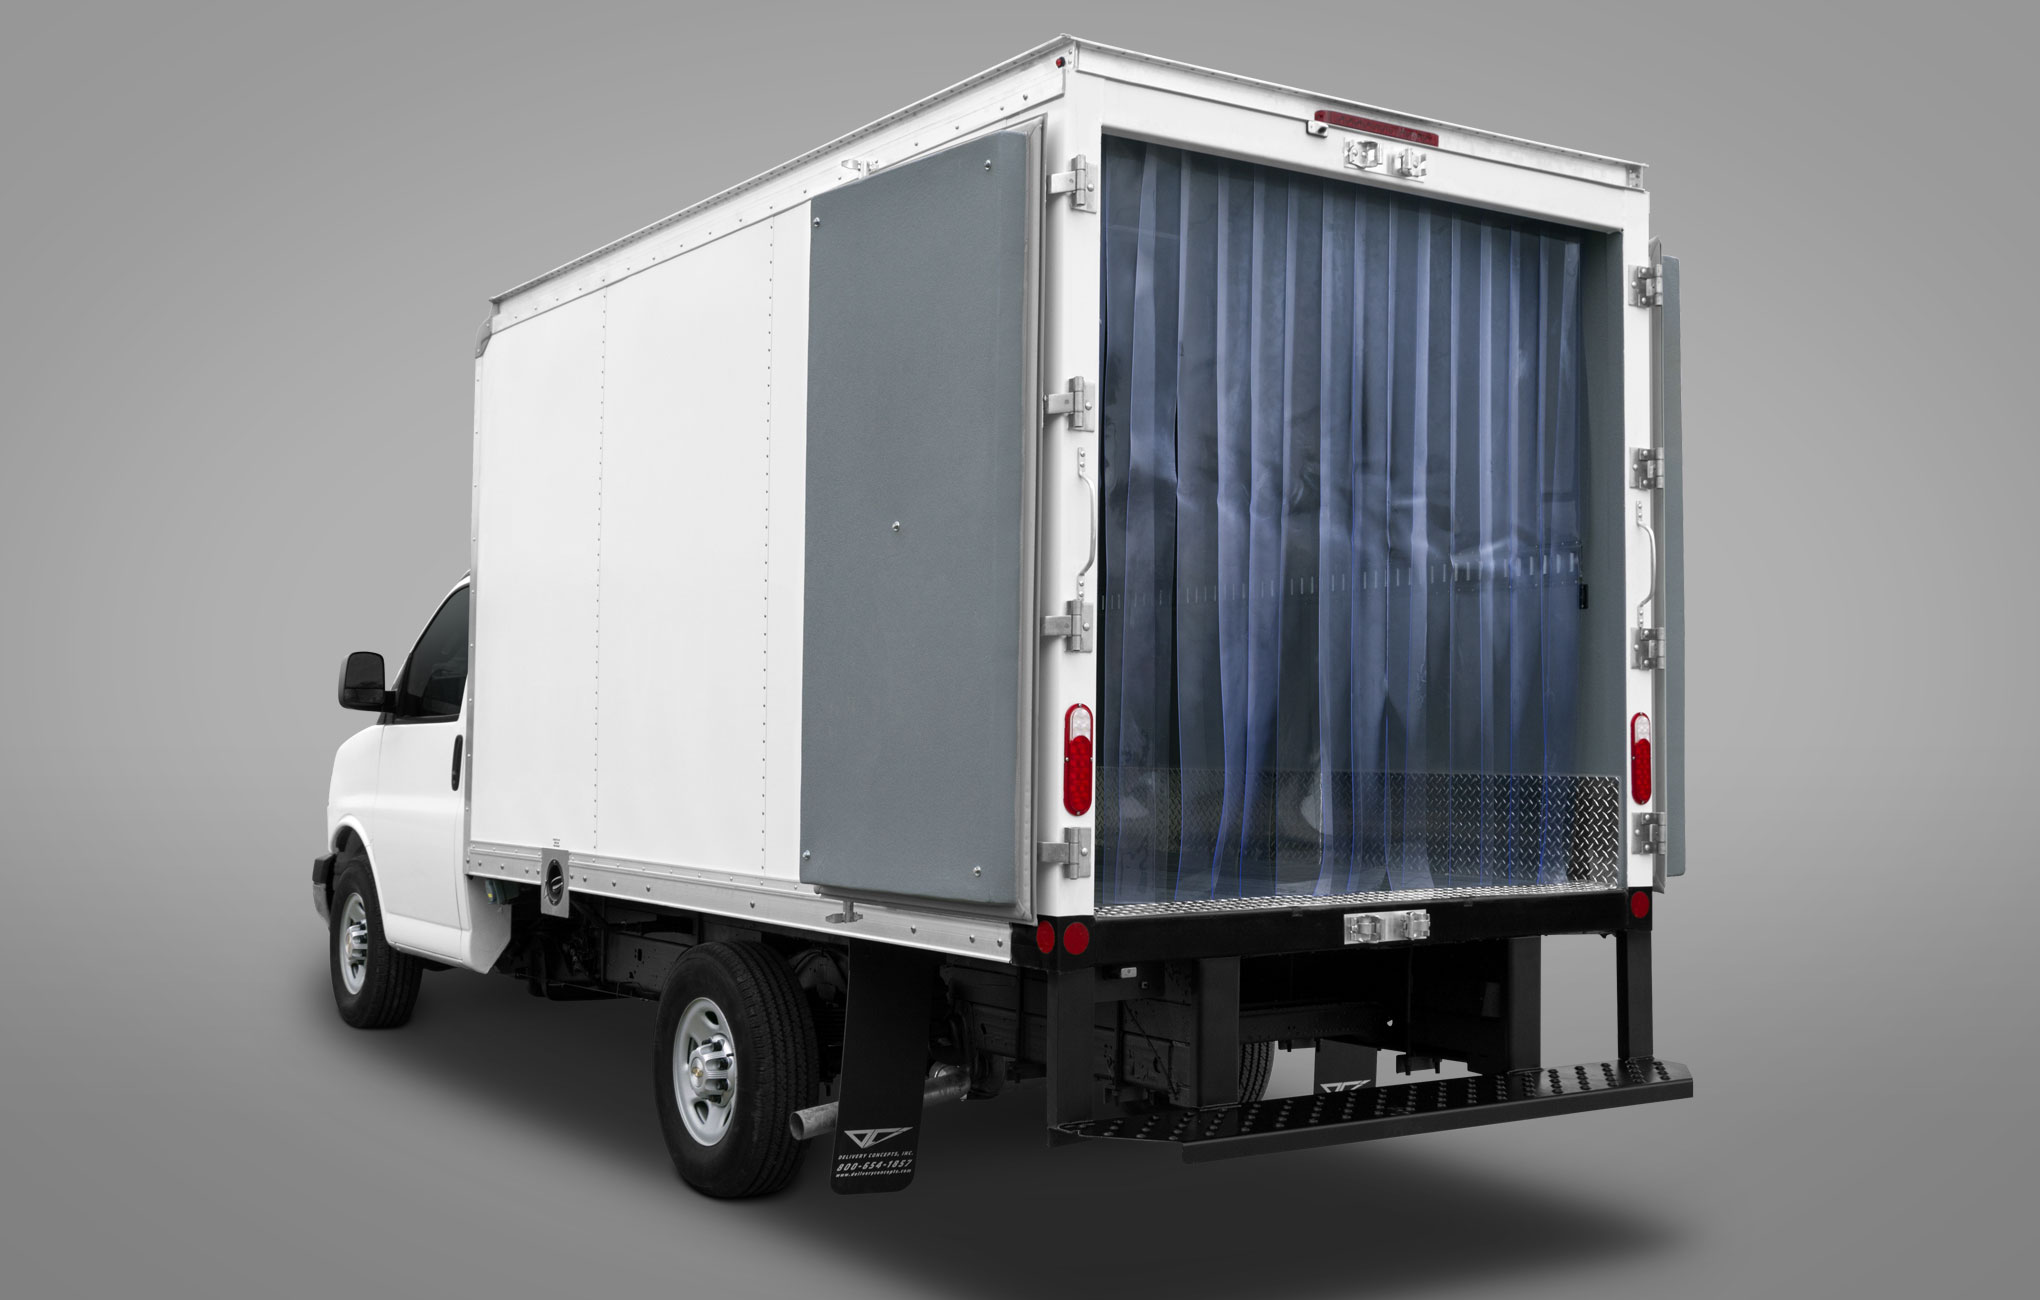 Why Your Business Should Invest in Refrigerated Vehicles